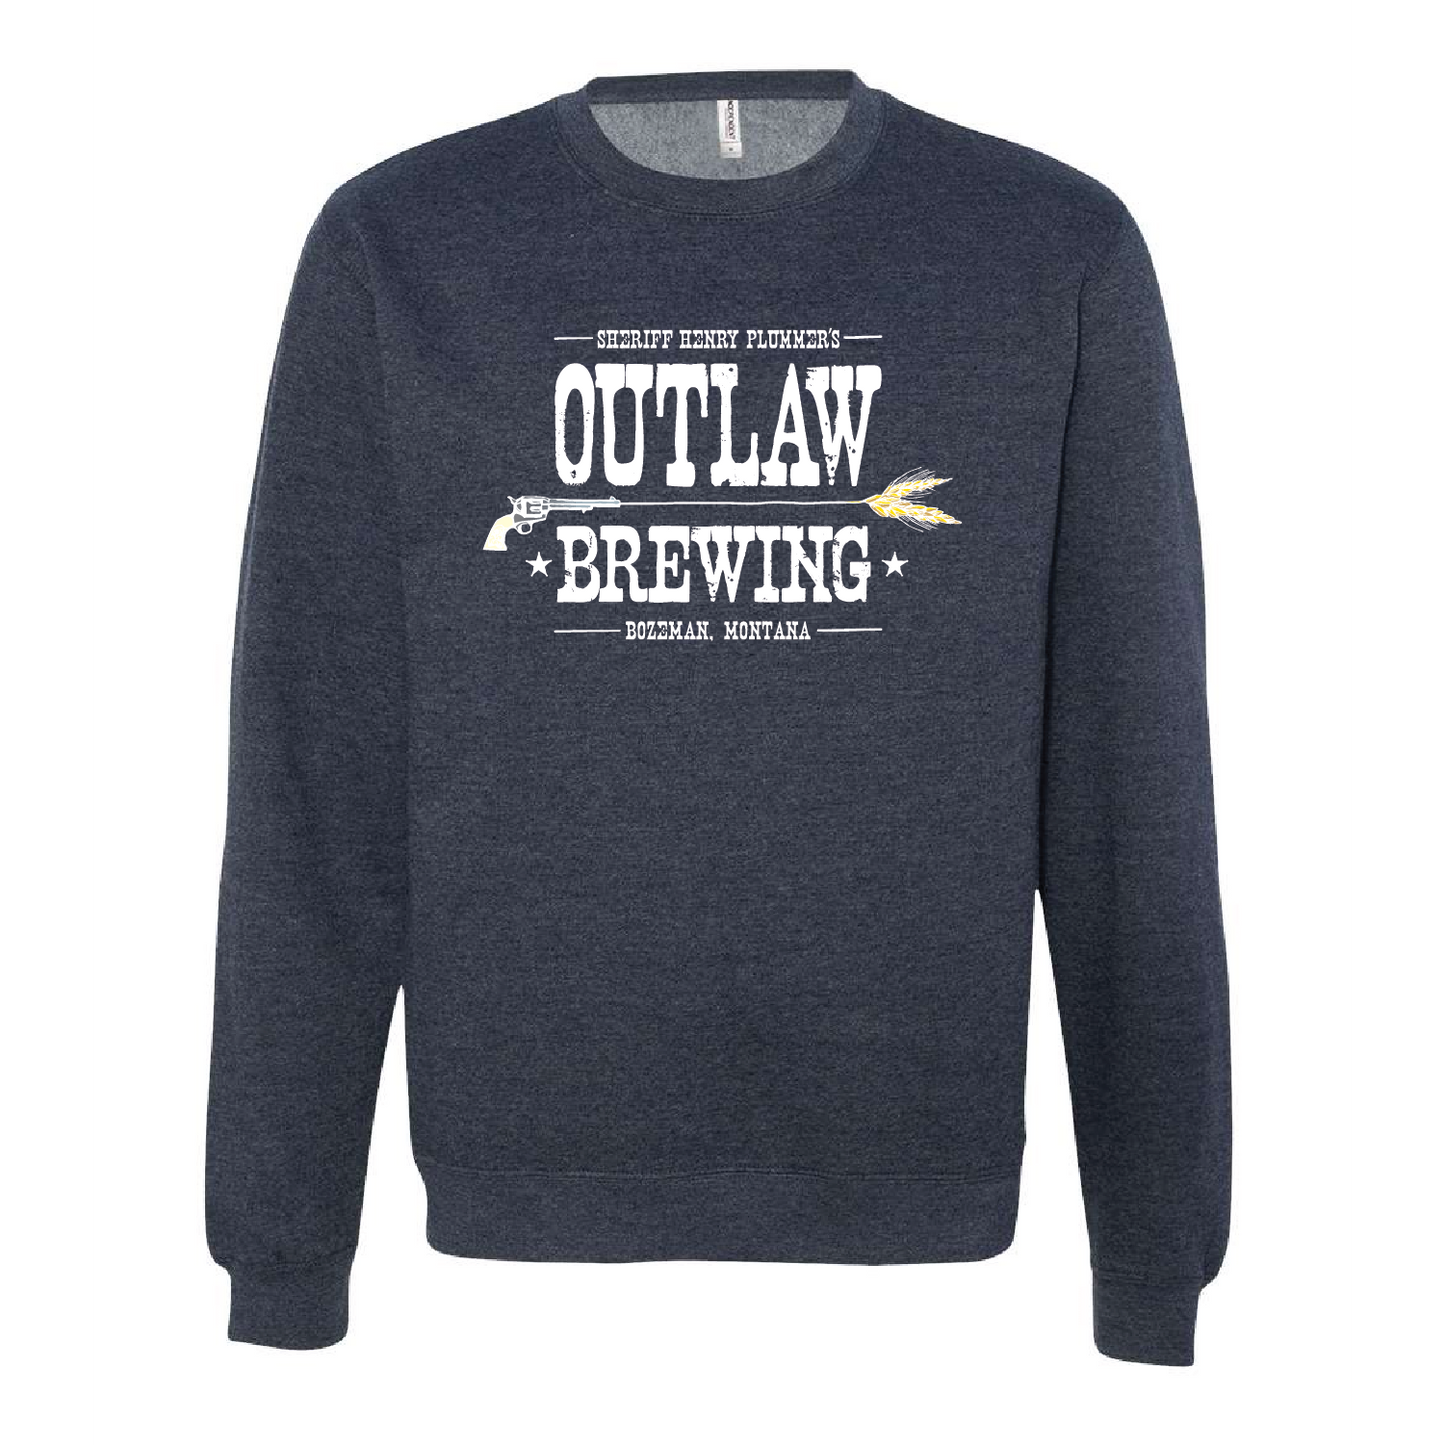 Outlaw Brewing Unisex Midweight Sweatshirt